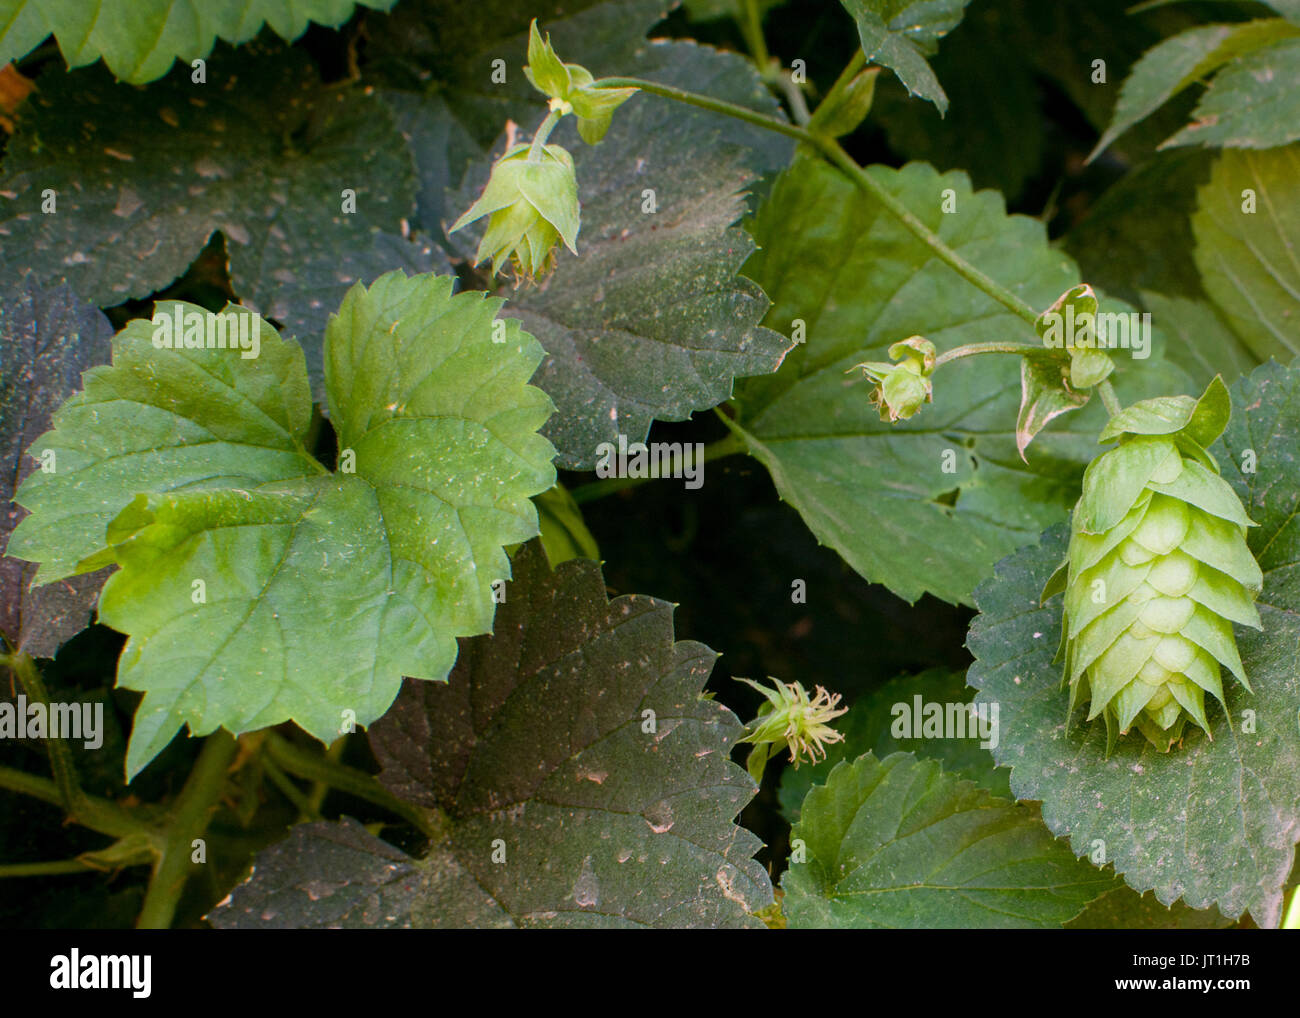 Overview of hop (Humulus lupulus) flowers and leaves. Hops are used in beer making as flavoring and stability agent Stock Photo